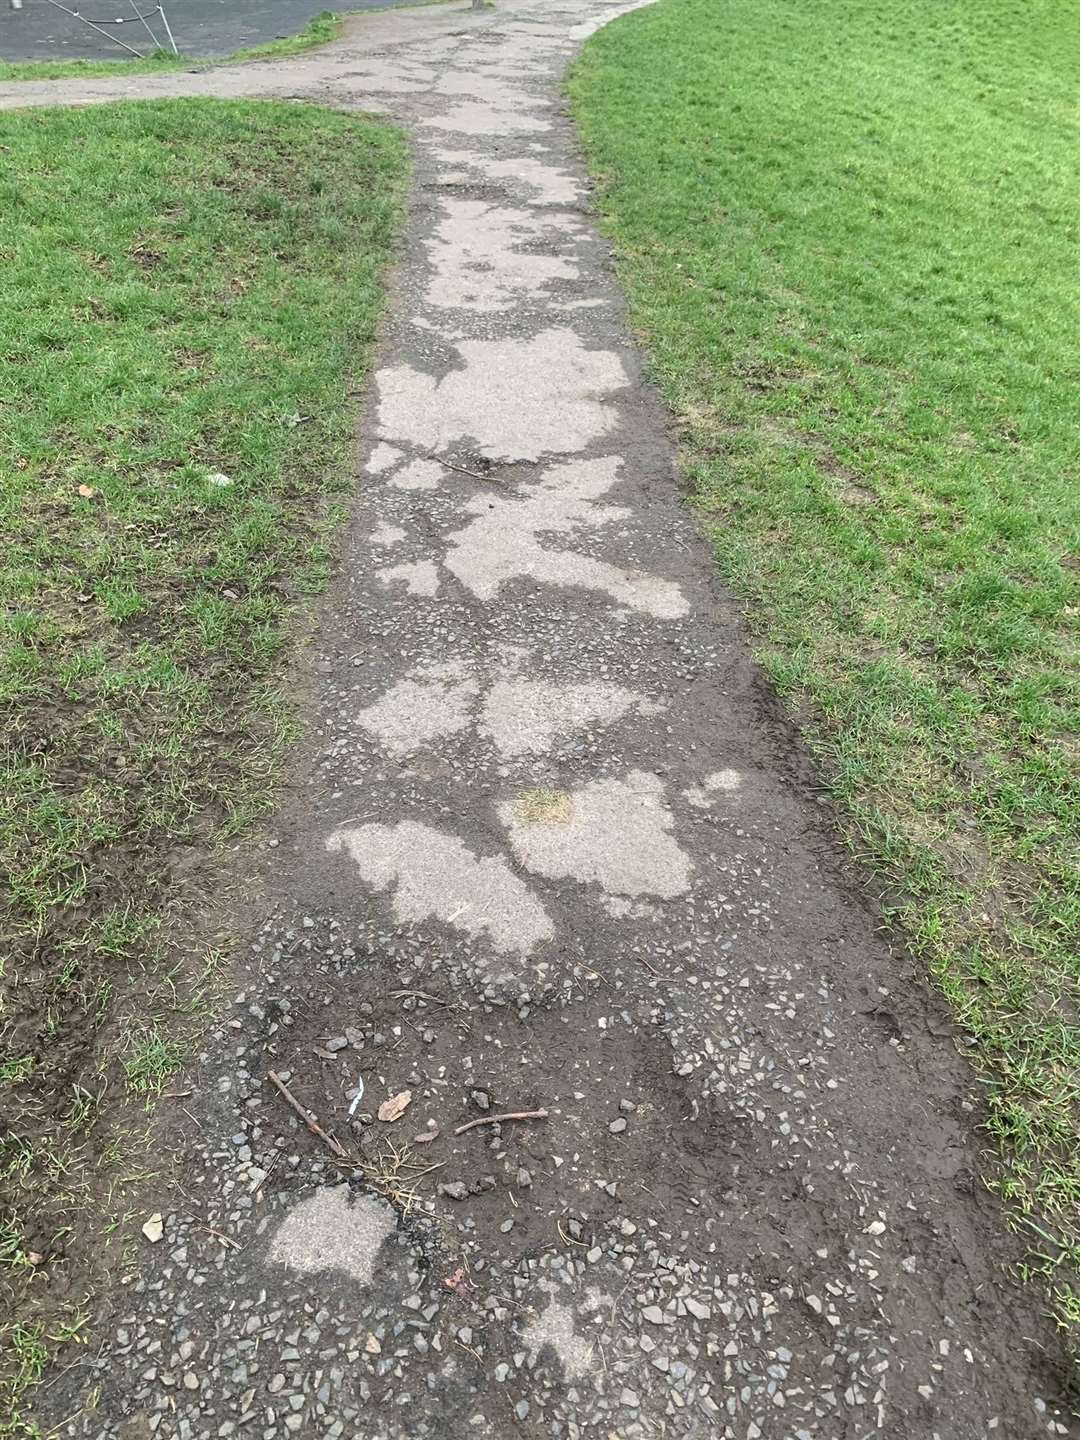 The path is in a poor condition and subject to flooding